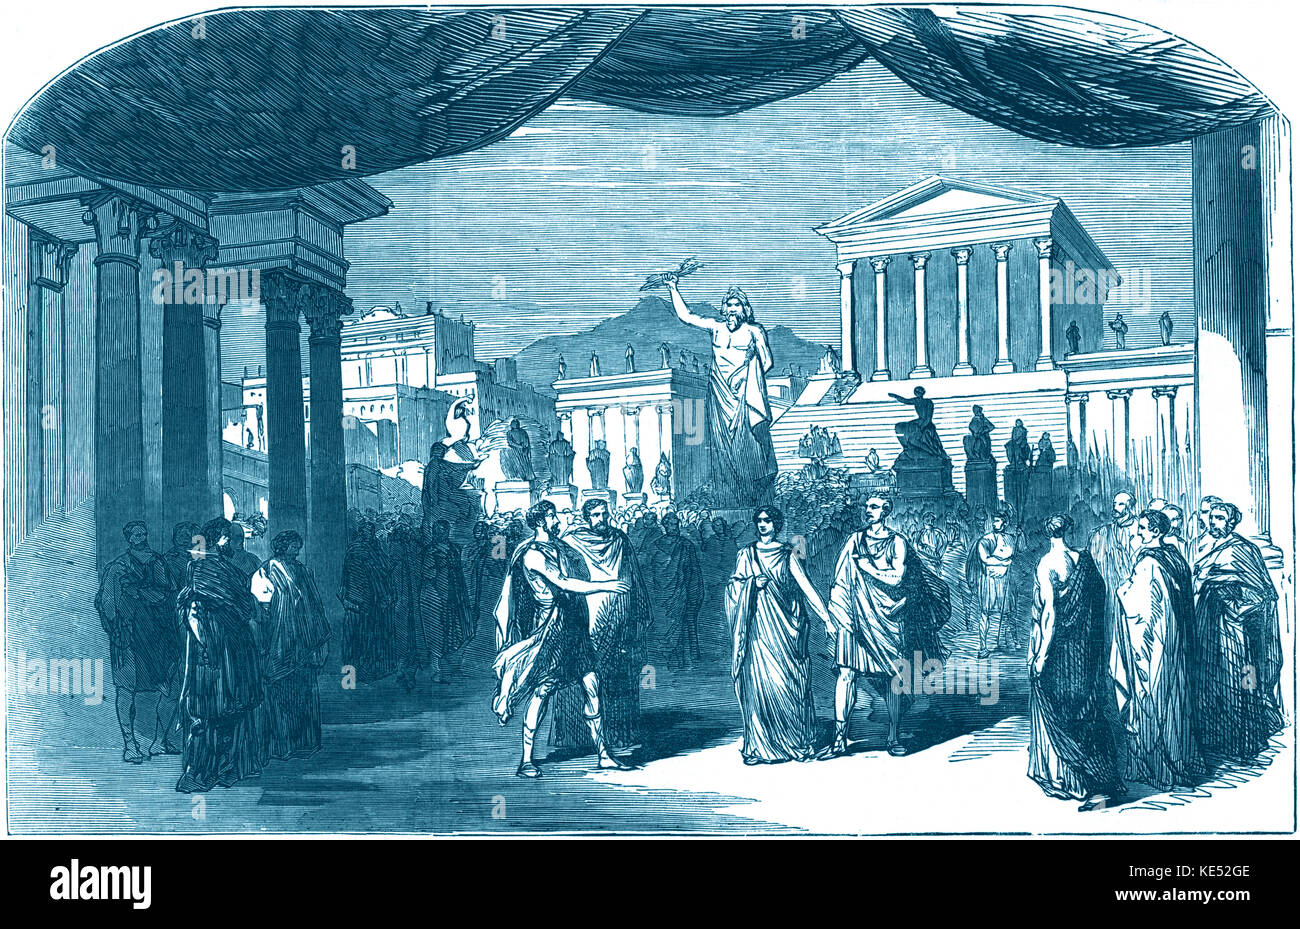 I Martiri / The Martyrs by Donizetti at  Royal Italian Opera, Covent Garden London 1852. 'Procession in the Forum'. Performers: Julienne, Tamberlik, Ronconi, Marini, Conductor Costa. Originally called Poliuto. Source:Illustrated London News 1852..   Italian composer , 29th November 1797 - 8th April 1848 Stock Photo